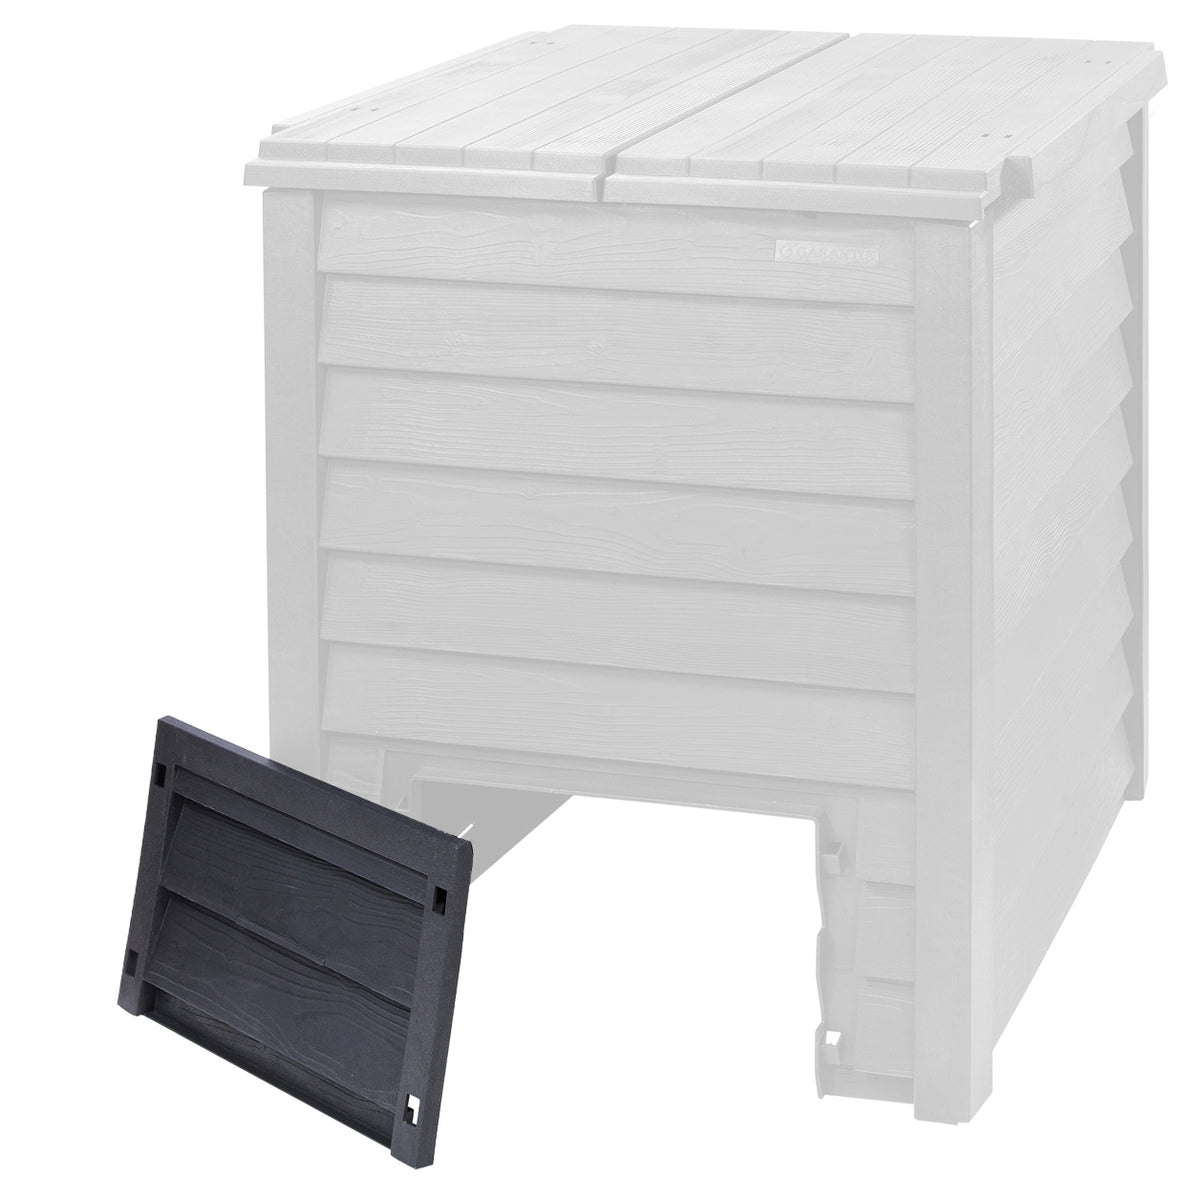 Bottom Door for 158-Gallon Thermo Wood Composter